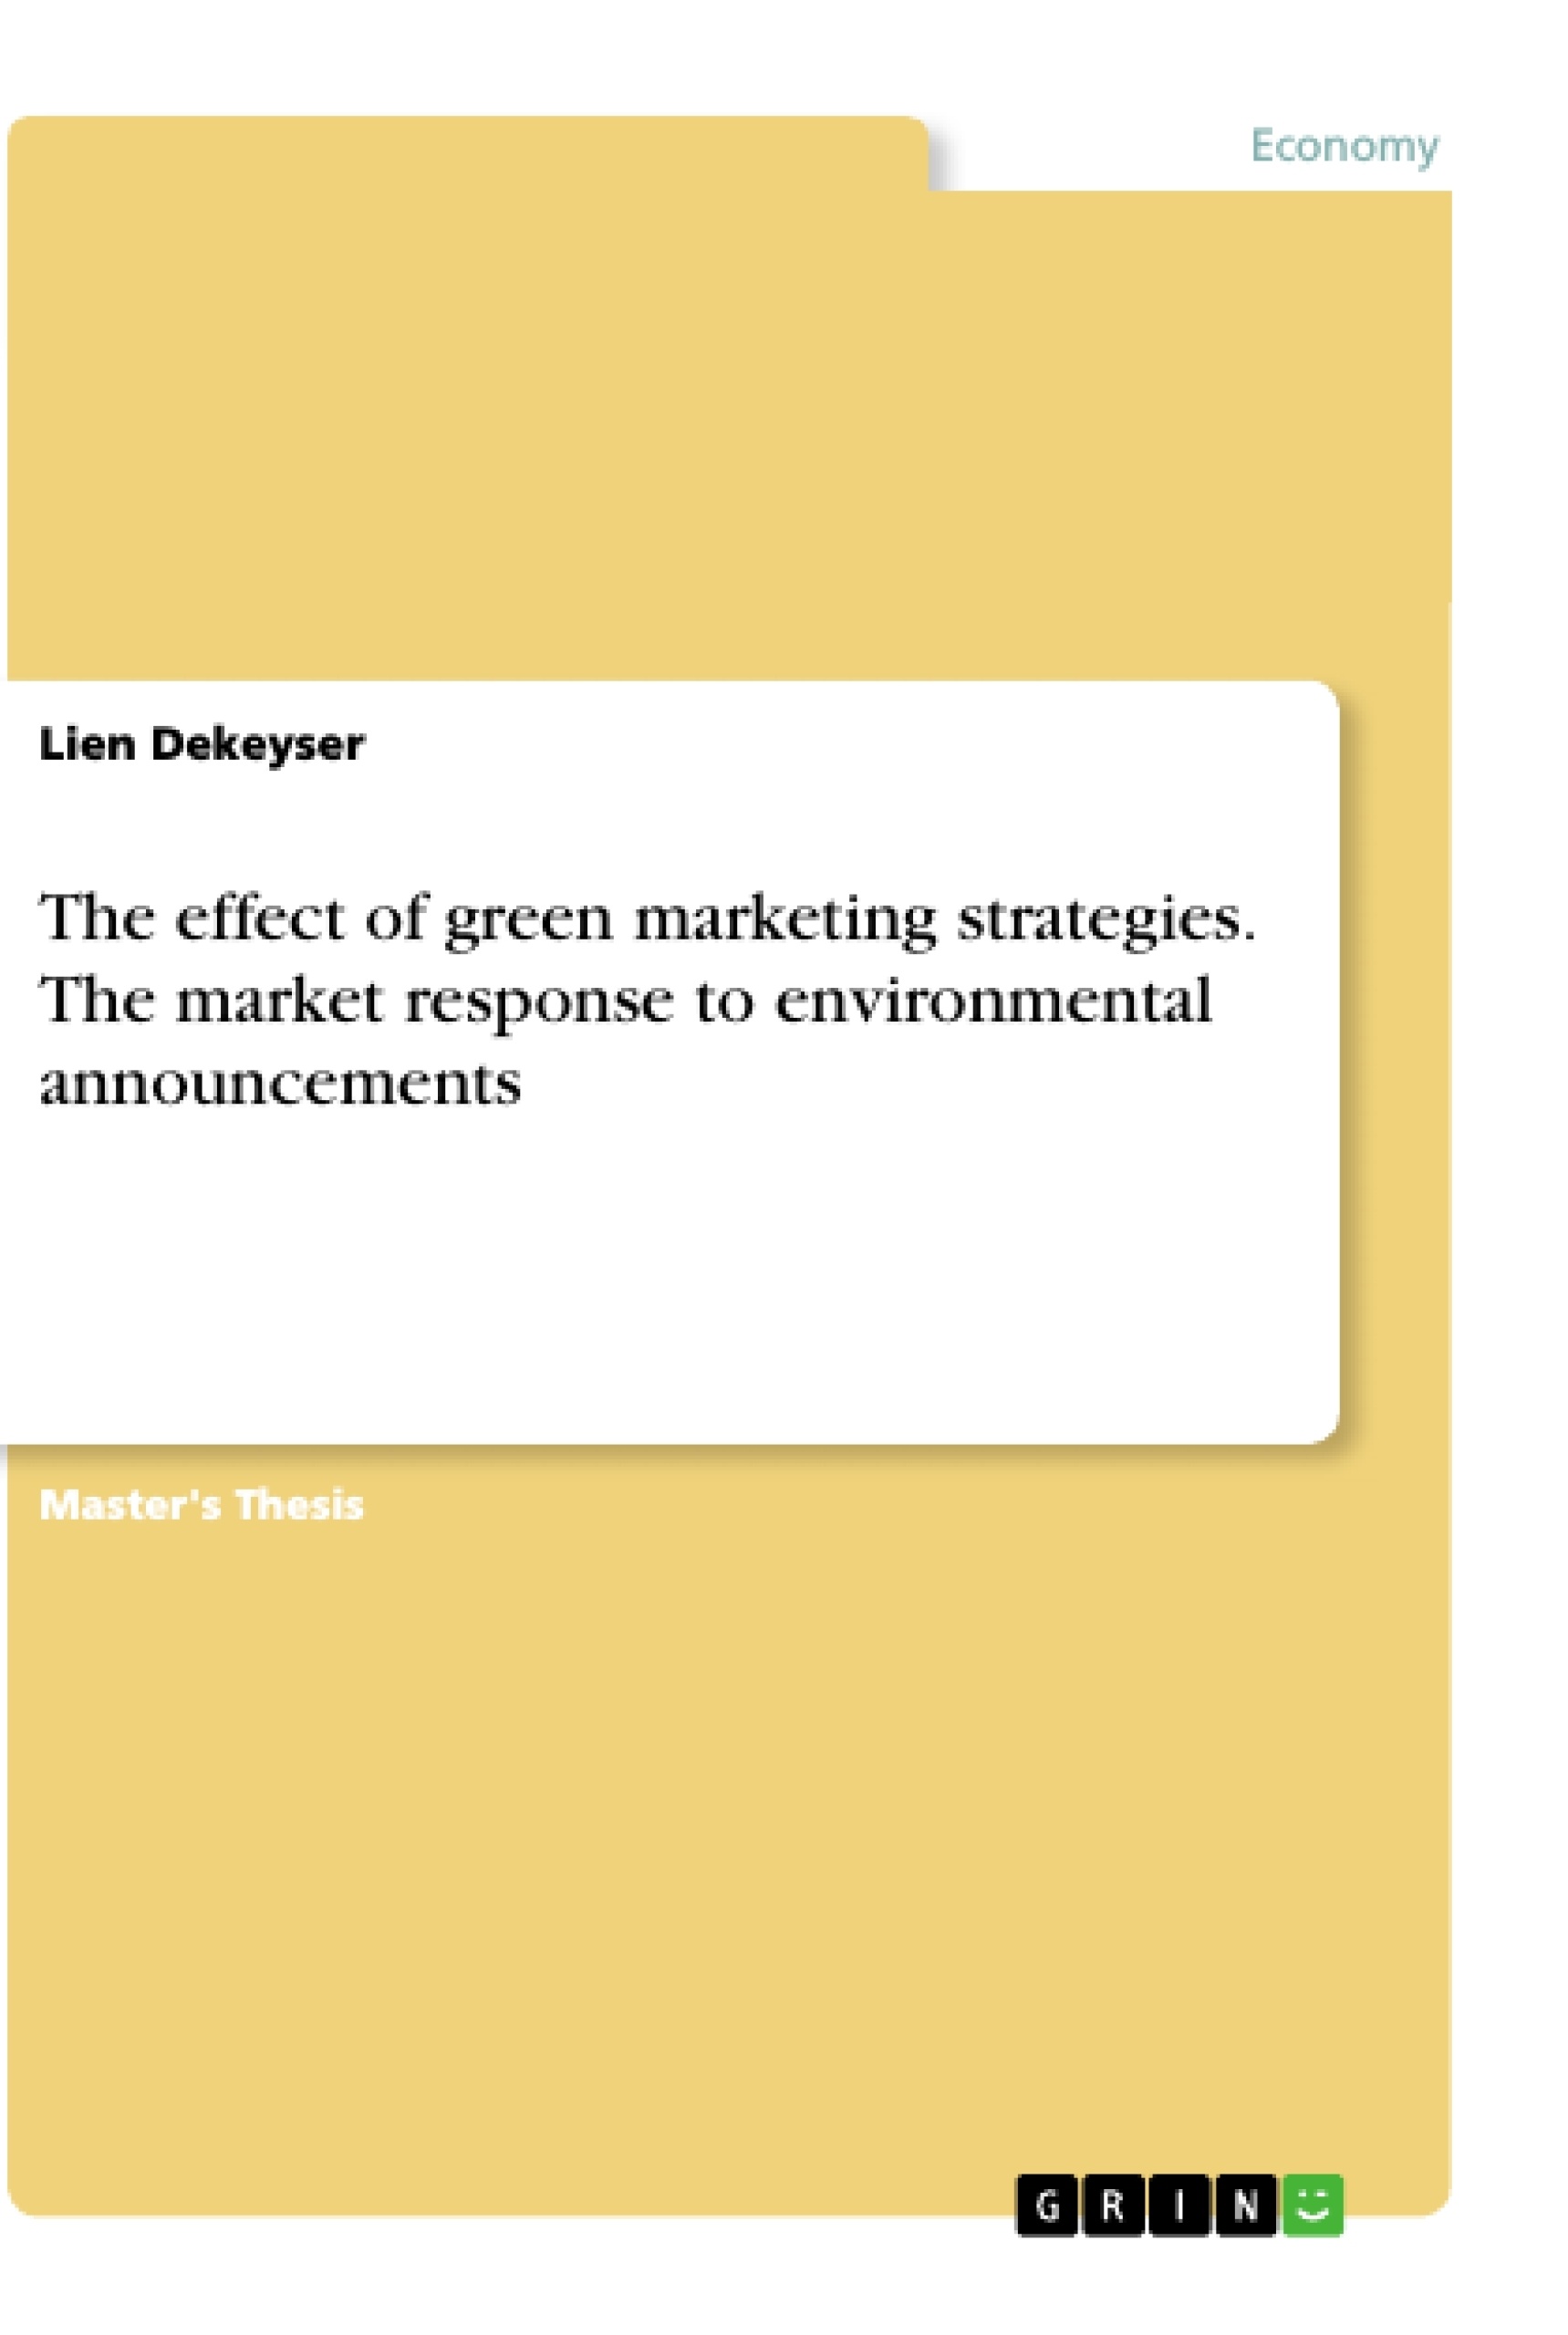 Título: The effect of green marketing strategies. The market response to environmental announcements